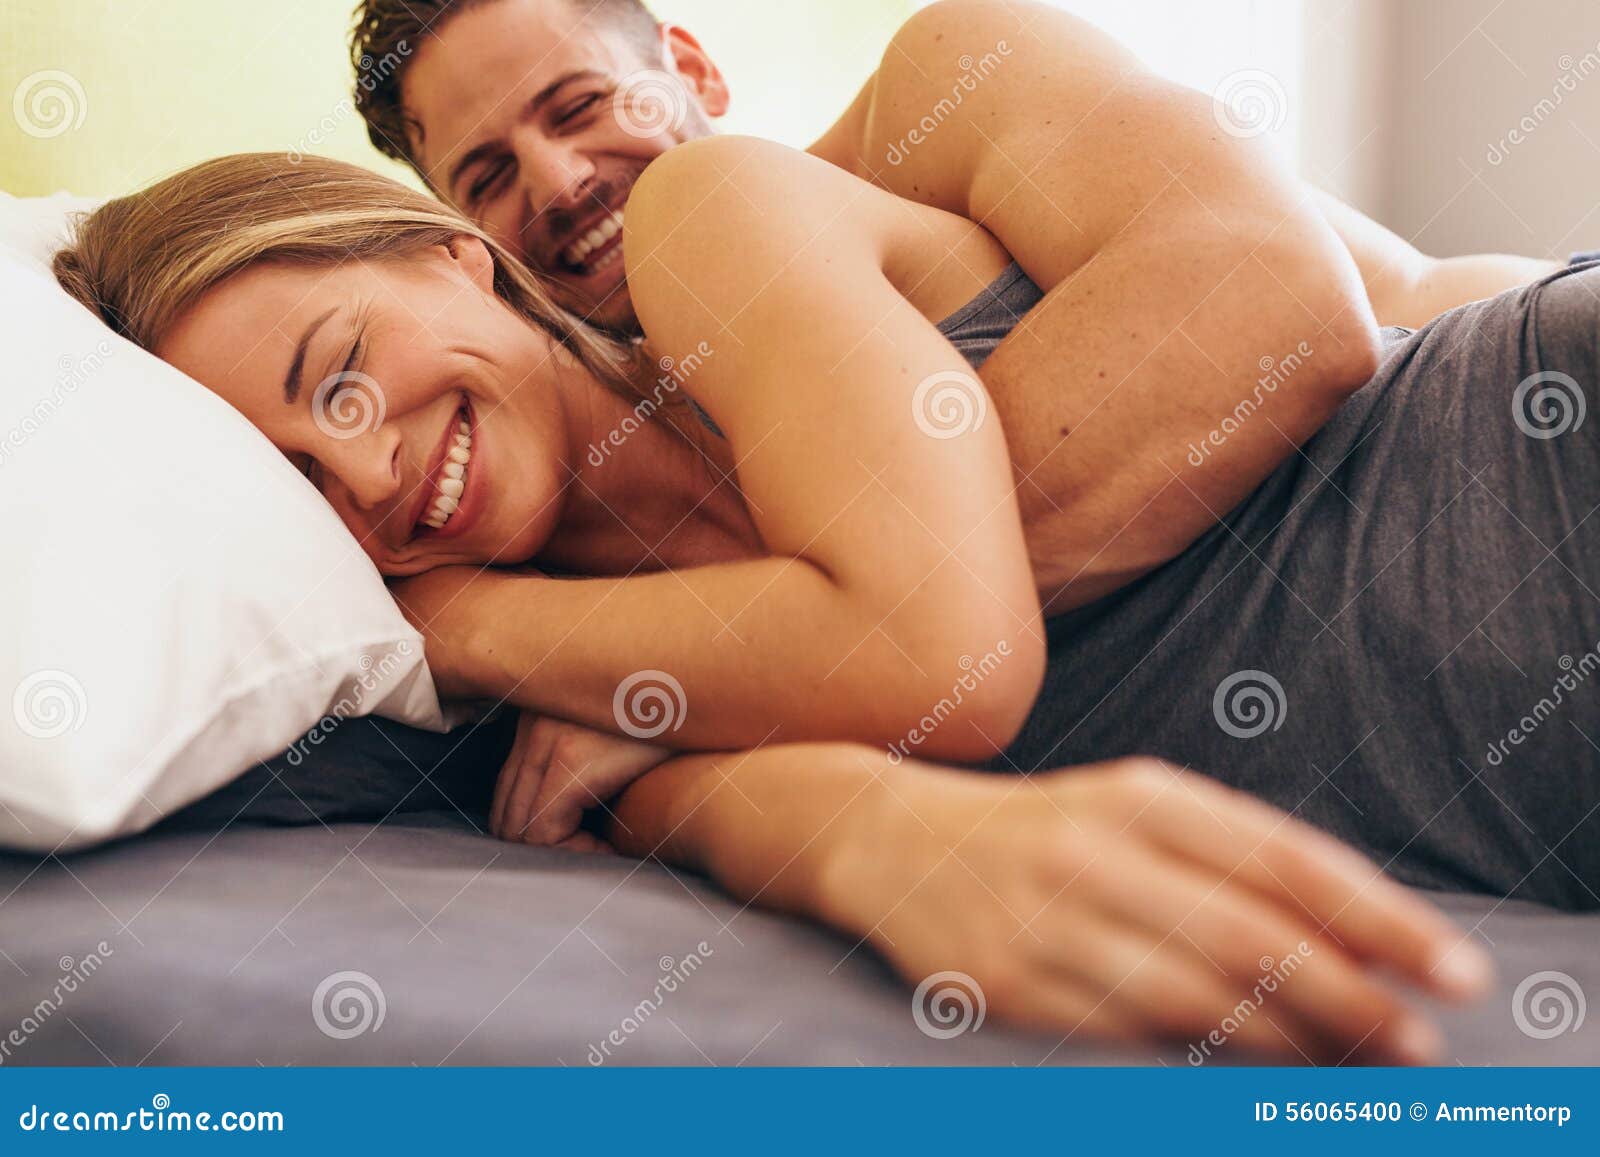 https://thumbs.dreamstime.com/z/cute-young-couple-love-lying-bed-image-man-waking-up-his-wife-morning-56065400.jpg